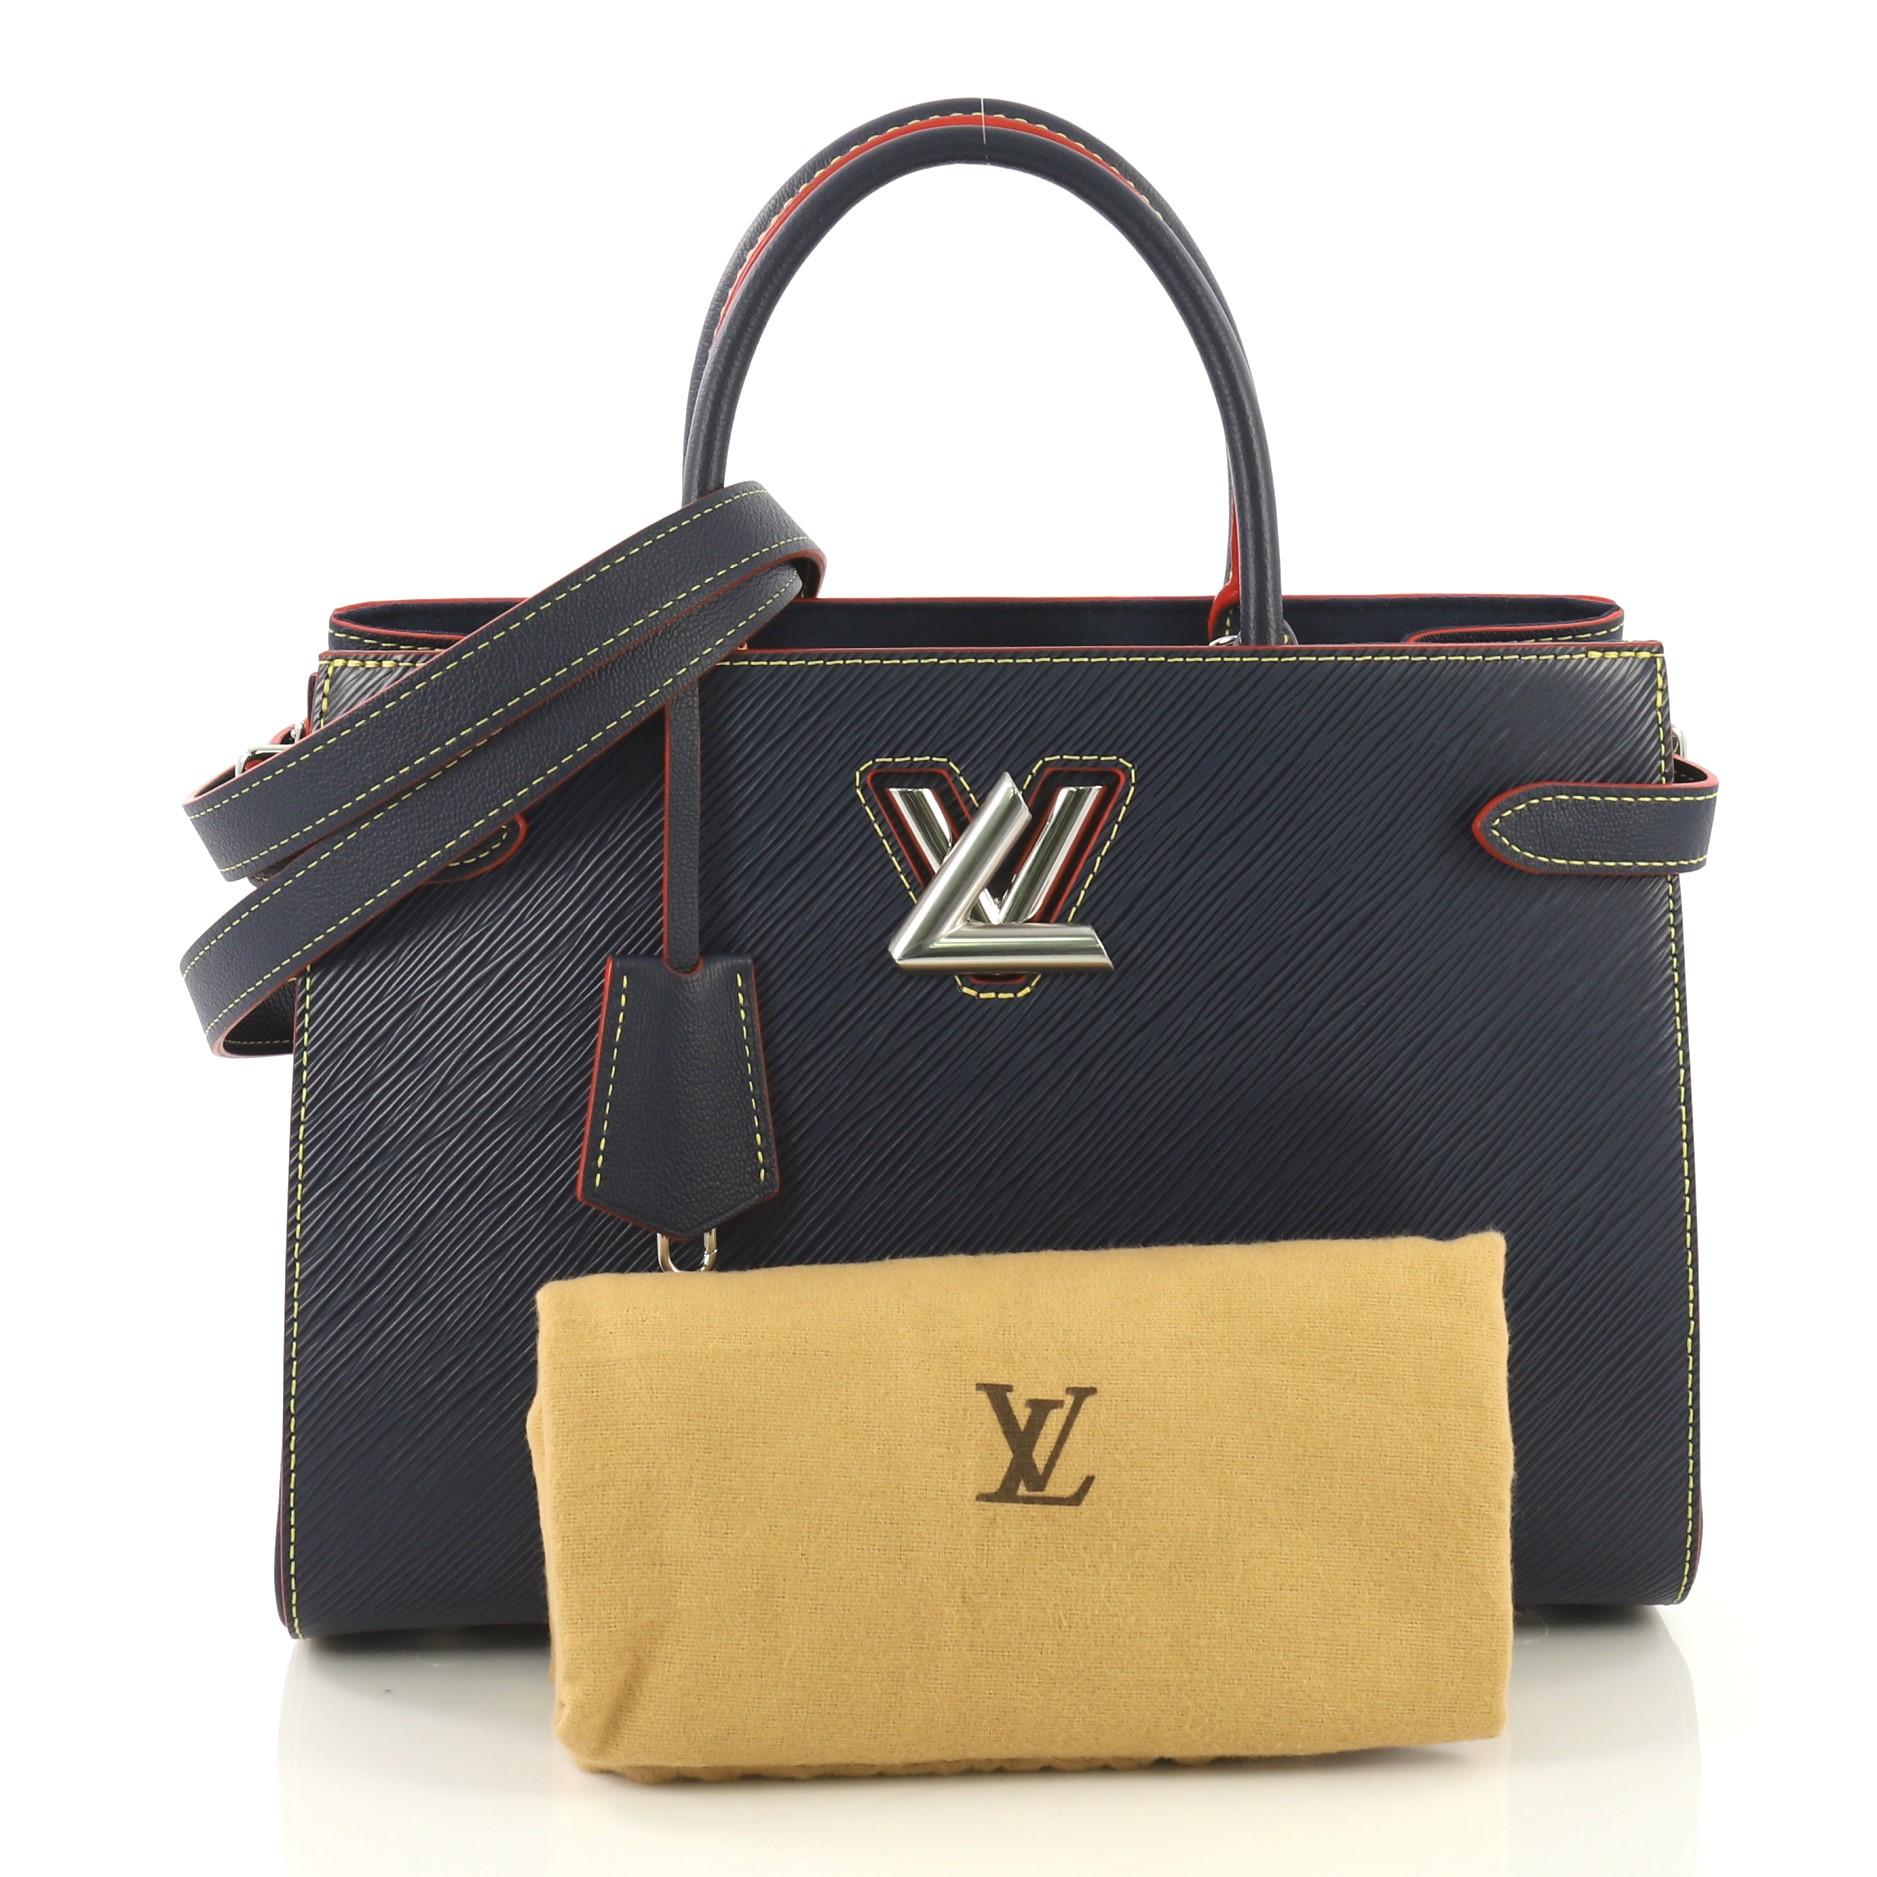 This Louis Vuitton Twist Tote Epi Leather, crafted in blue epi leather, features two Toron handles and silver-tone hardware. Its twist lock closure opens to a blue microfiber interior with two open compartments and a middle zip pocket. Authenticity